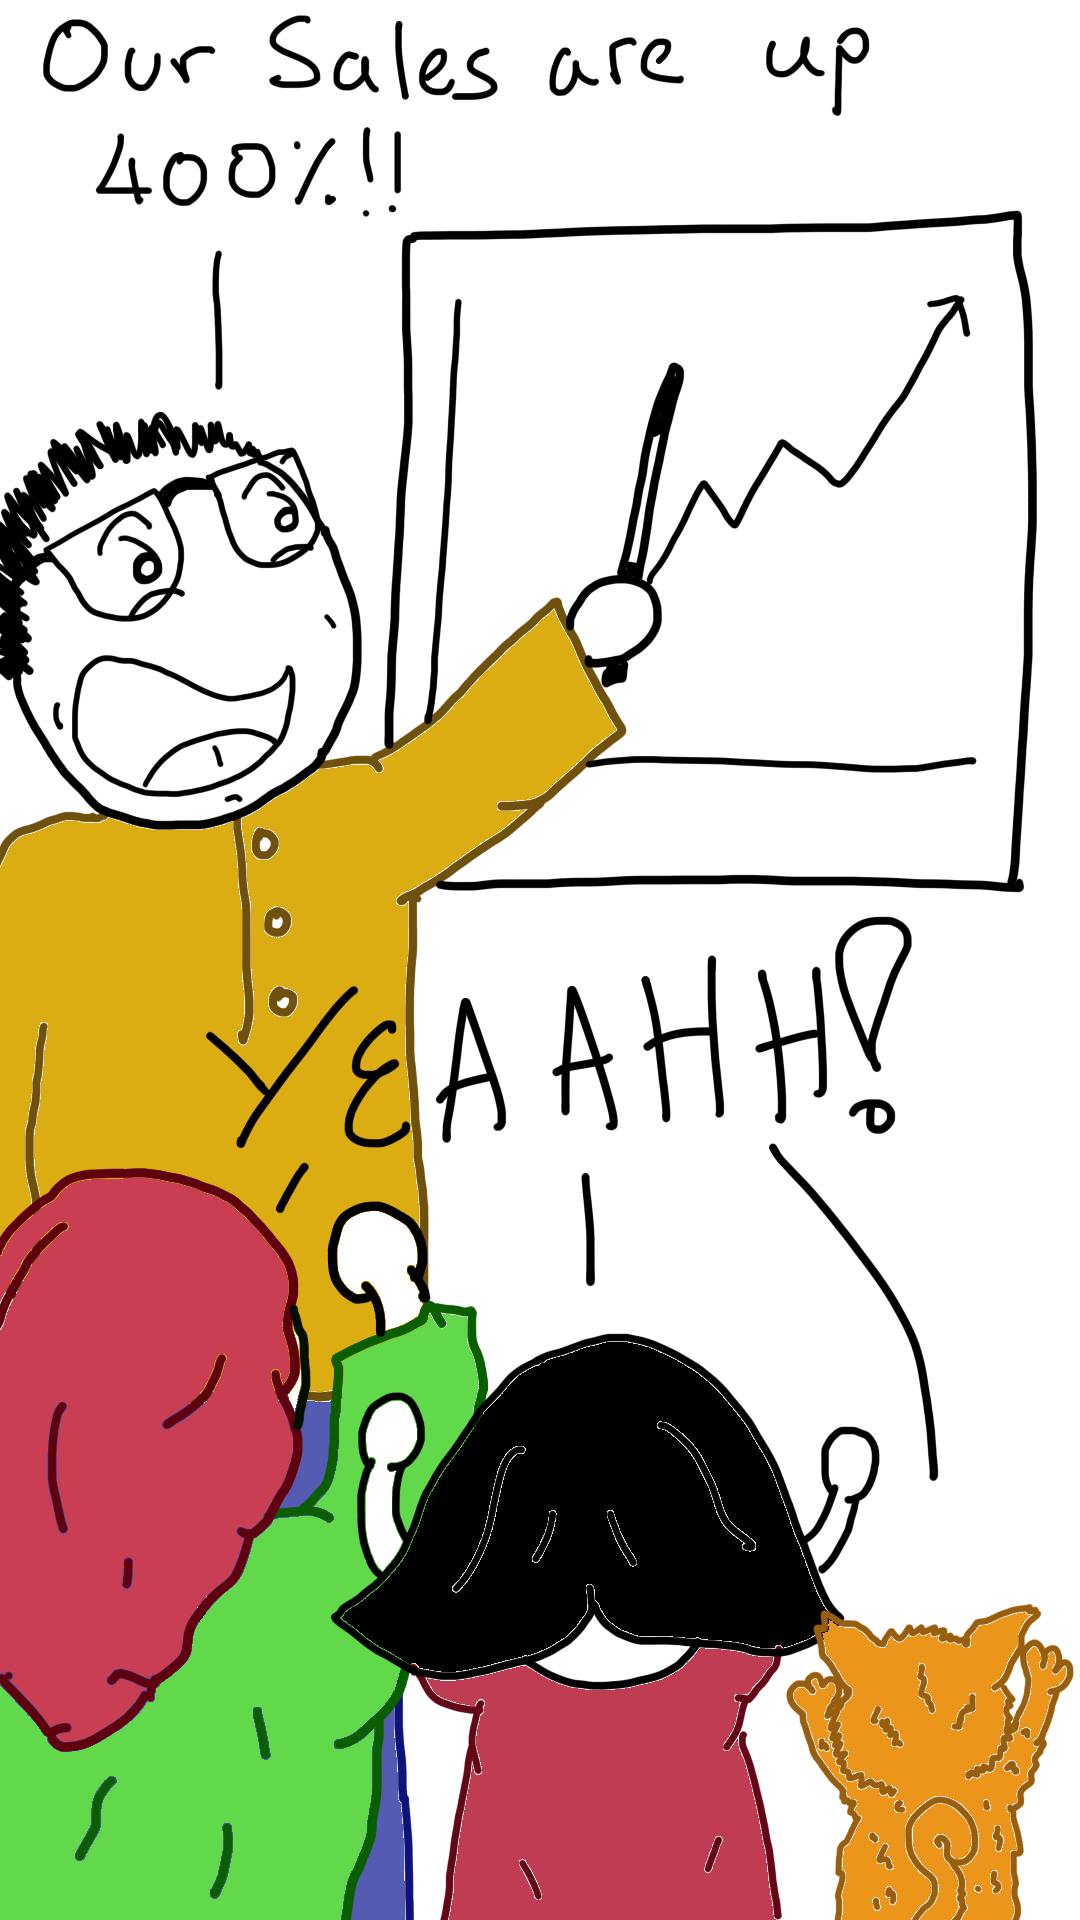 Comic Sam is pointing at a graph chart which is heading upwards. The whole team, which has Swolema (in the pink headscarf on the left), Ahmed (in the red shirt) and Guyfur, the Cat. Sam is Saying 'Our sales are up 40%'